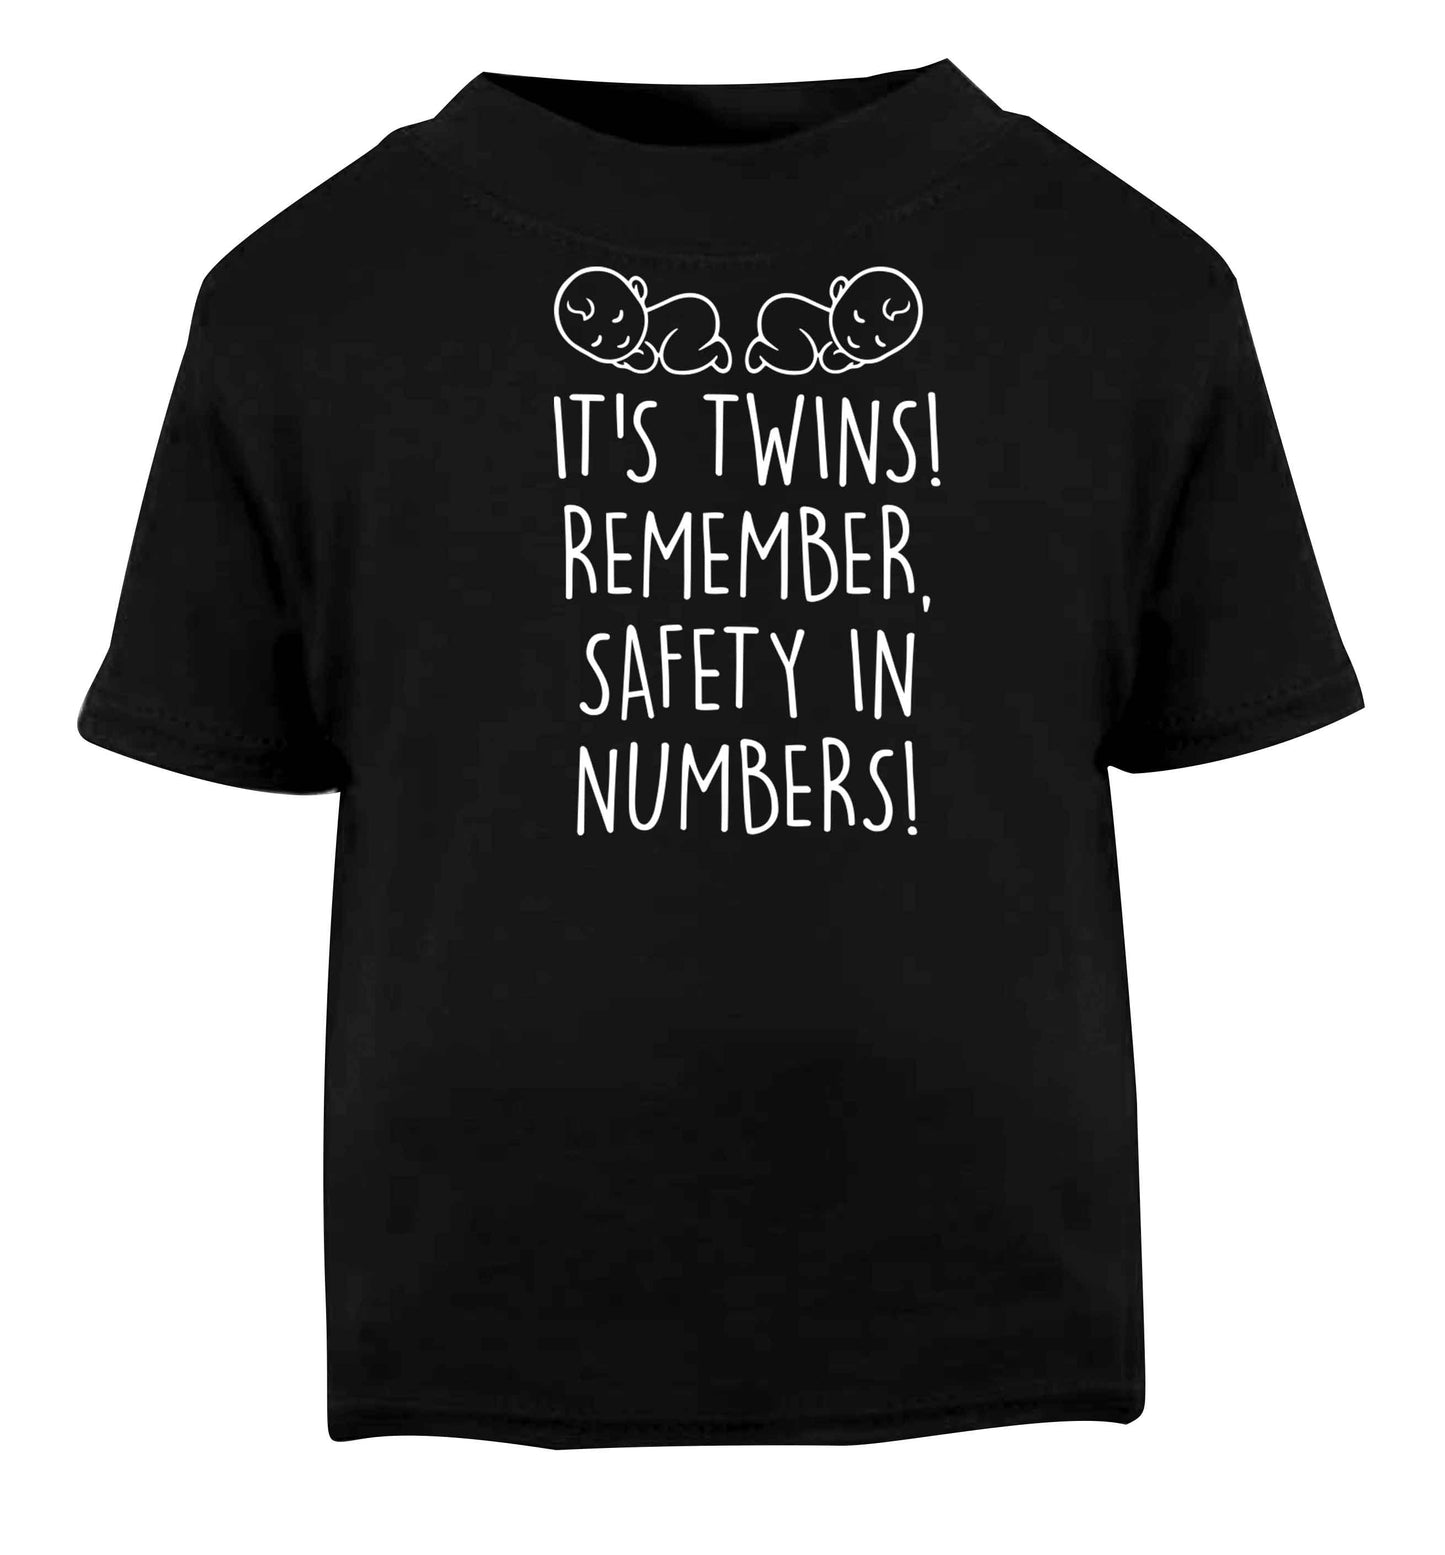 It's twins! Remember safety in numbers! Black baby toddler Tshirt 2 years